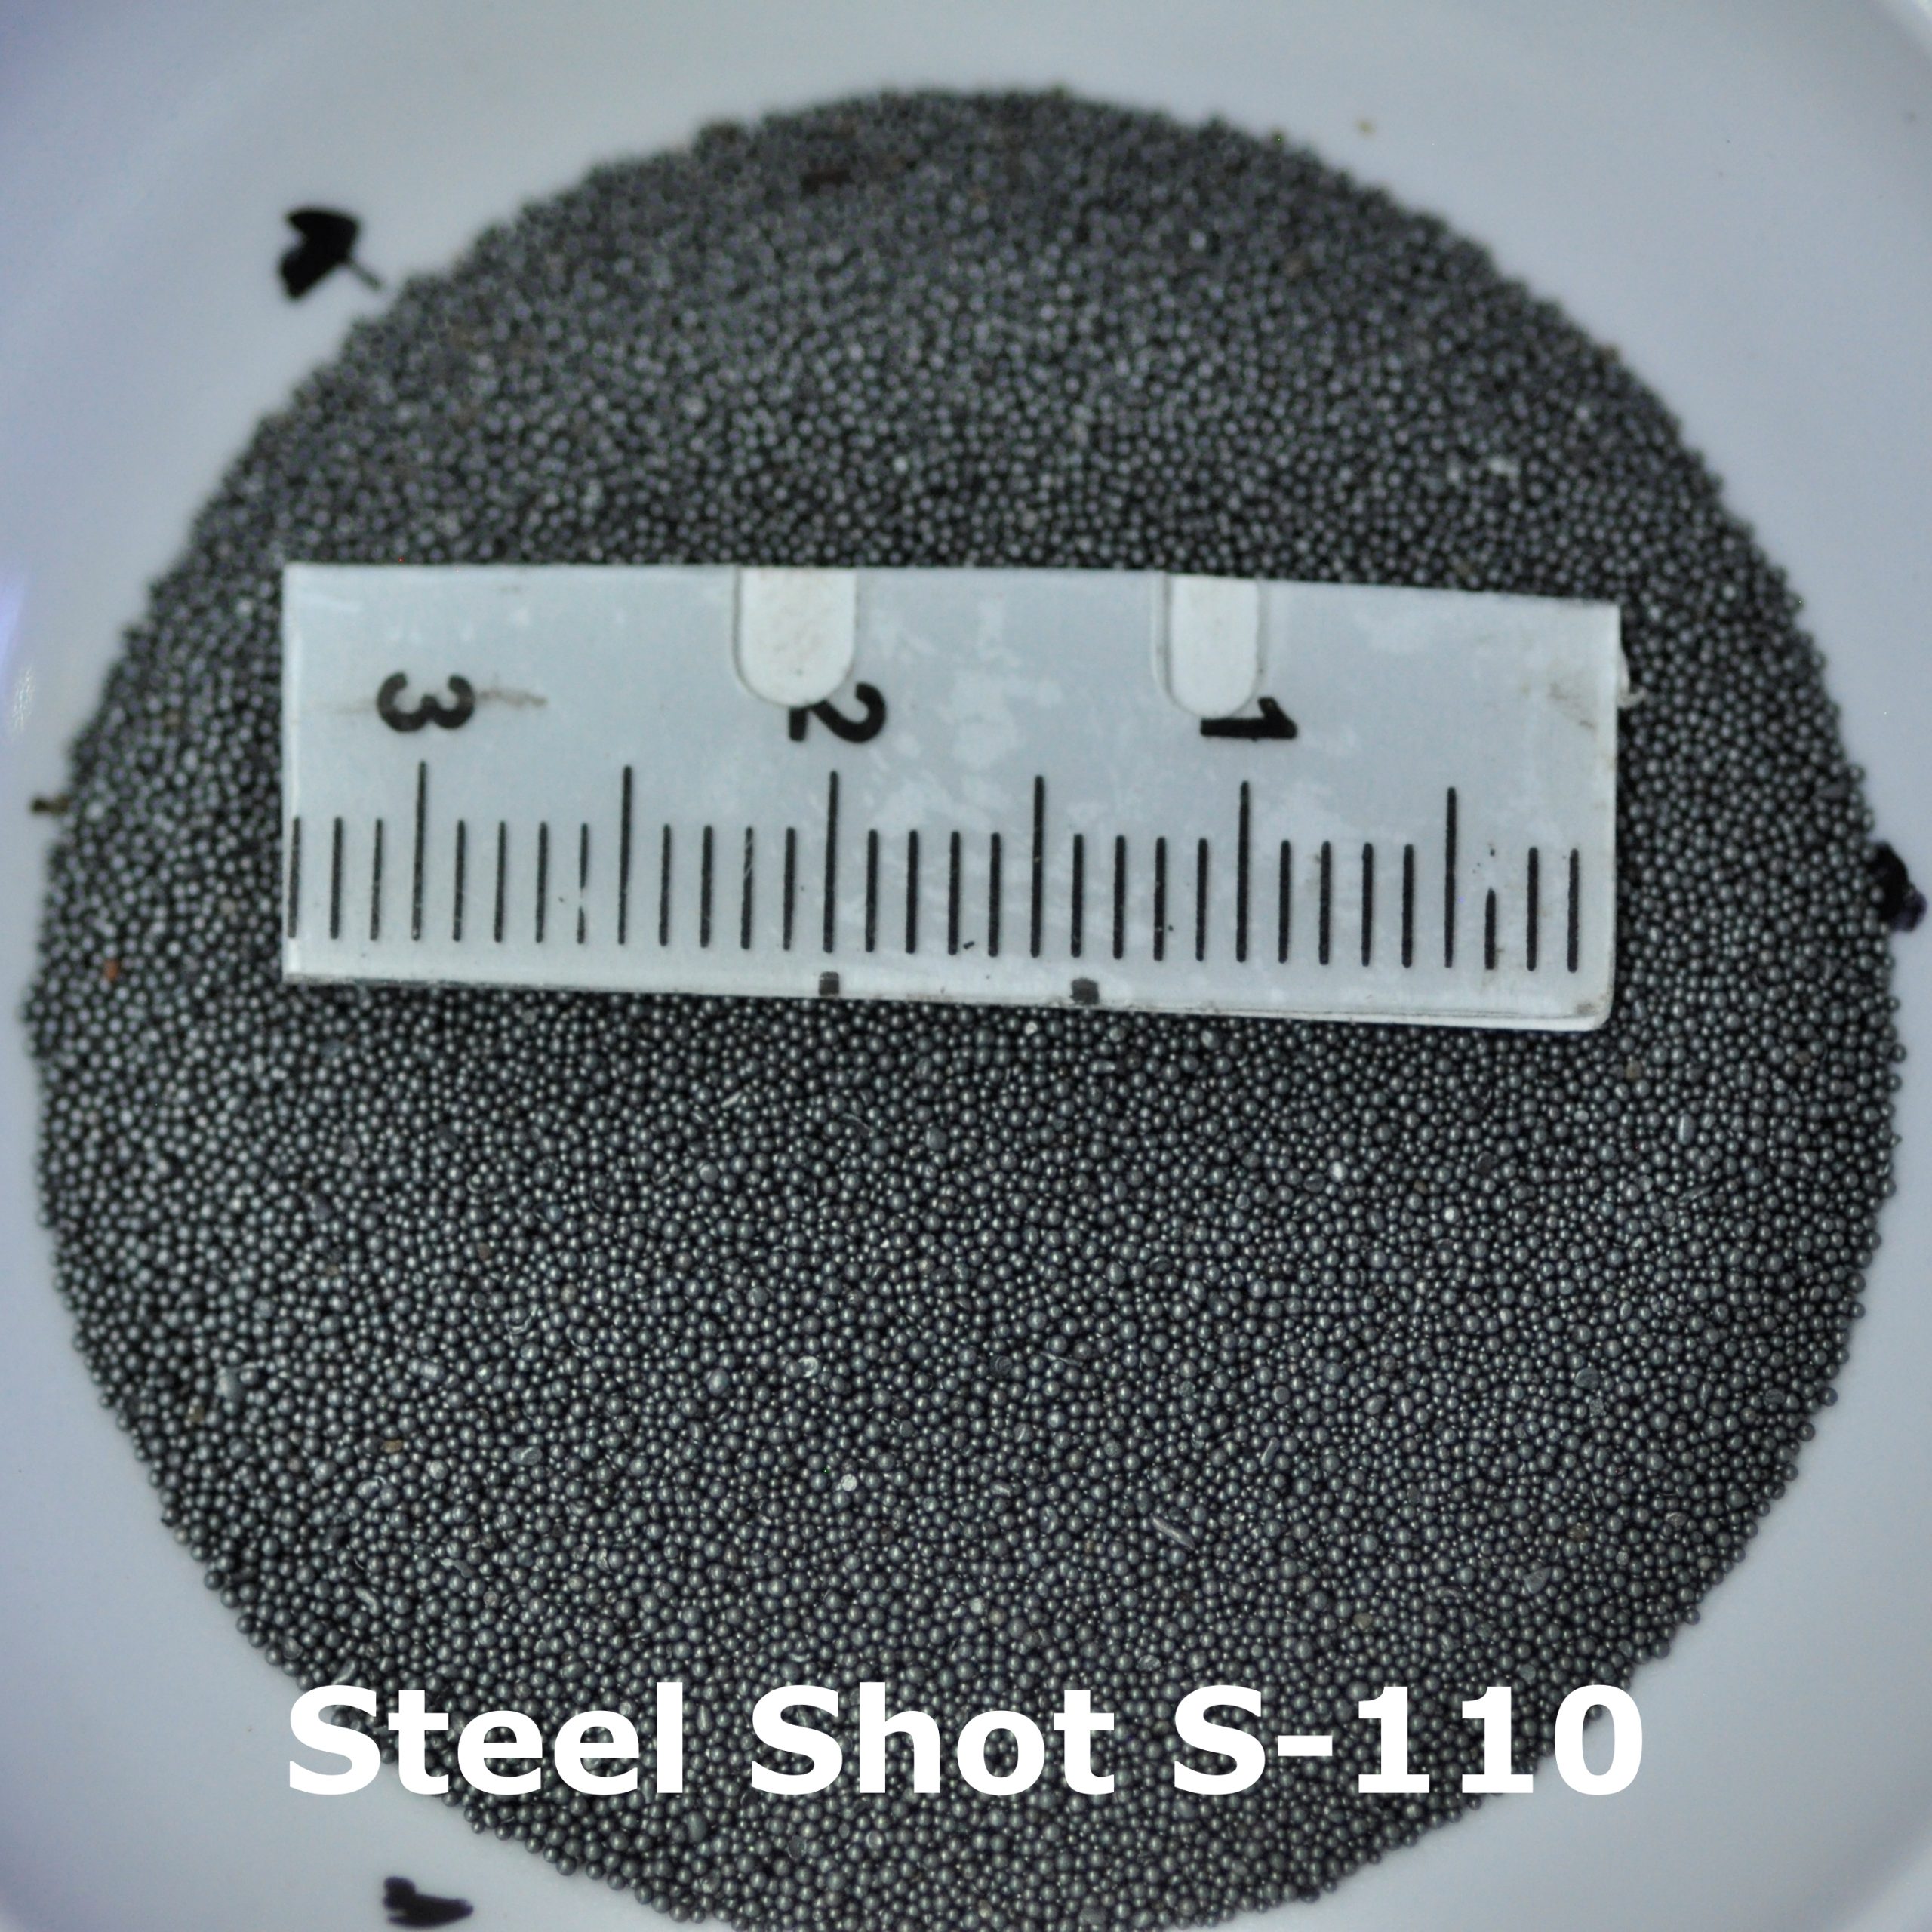 S-110/SH-30
Size 0.30mm